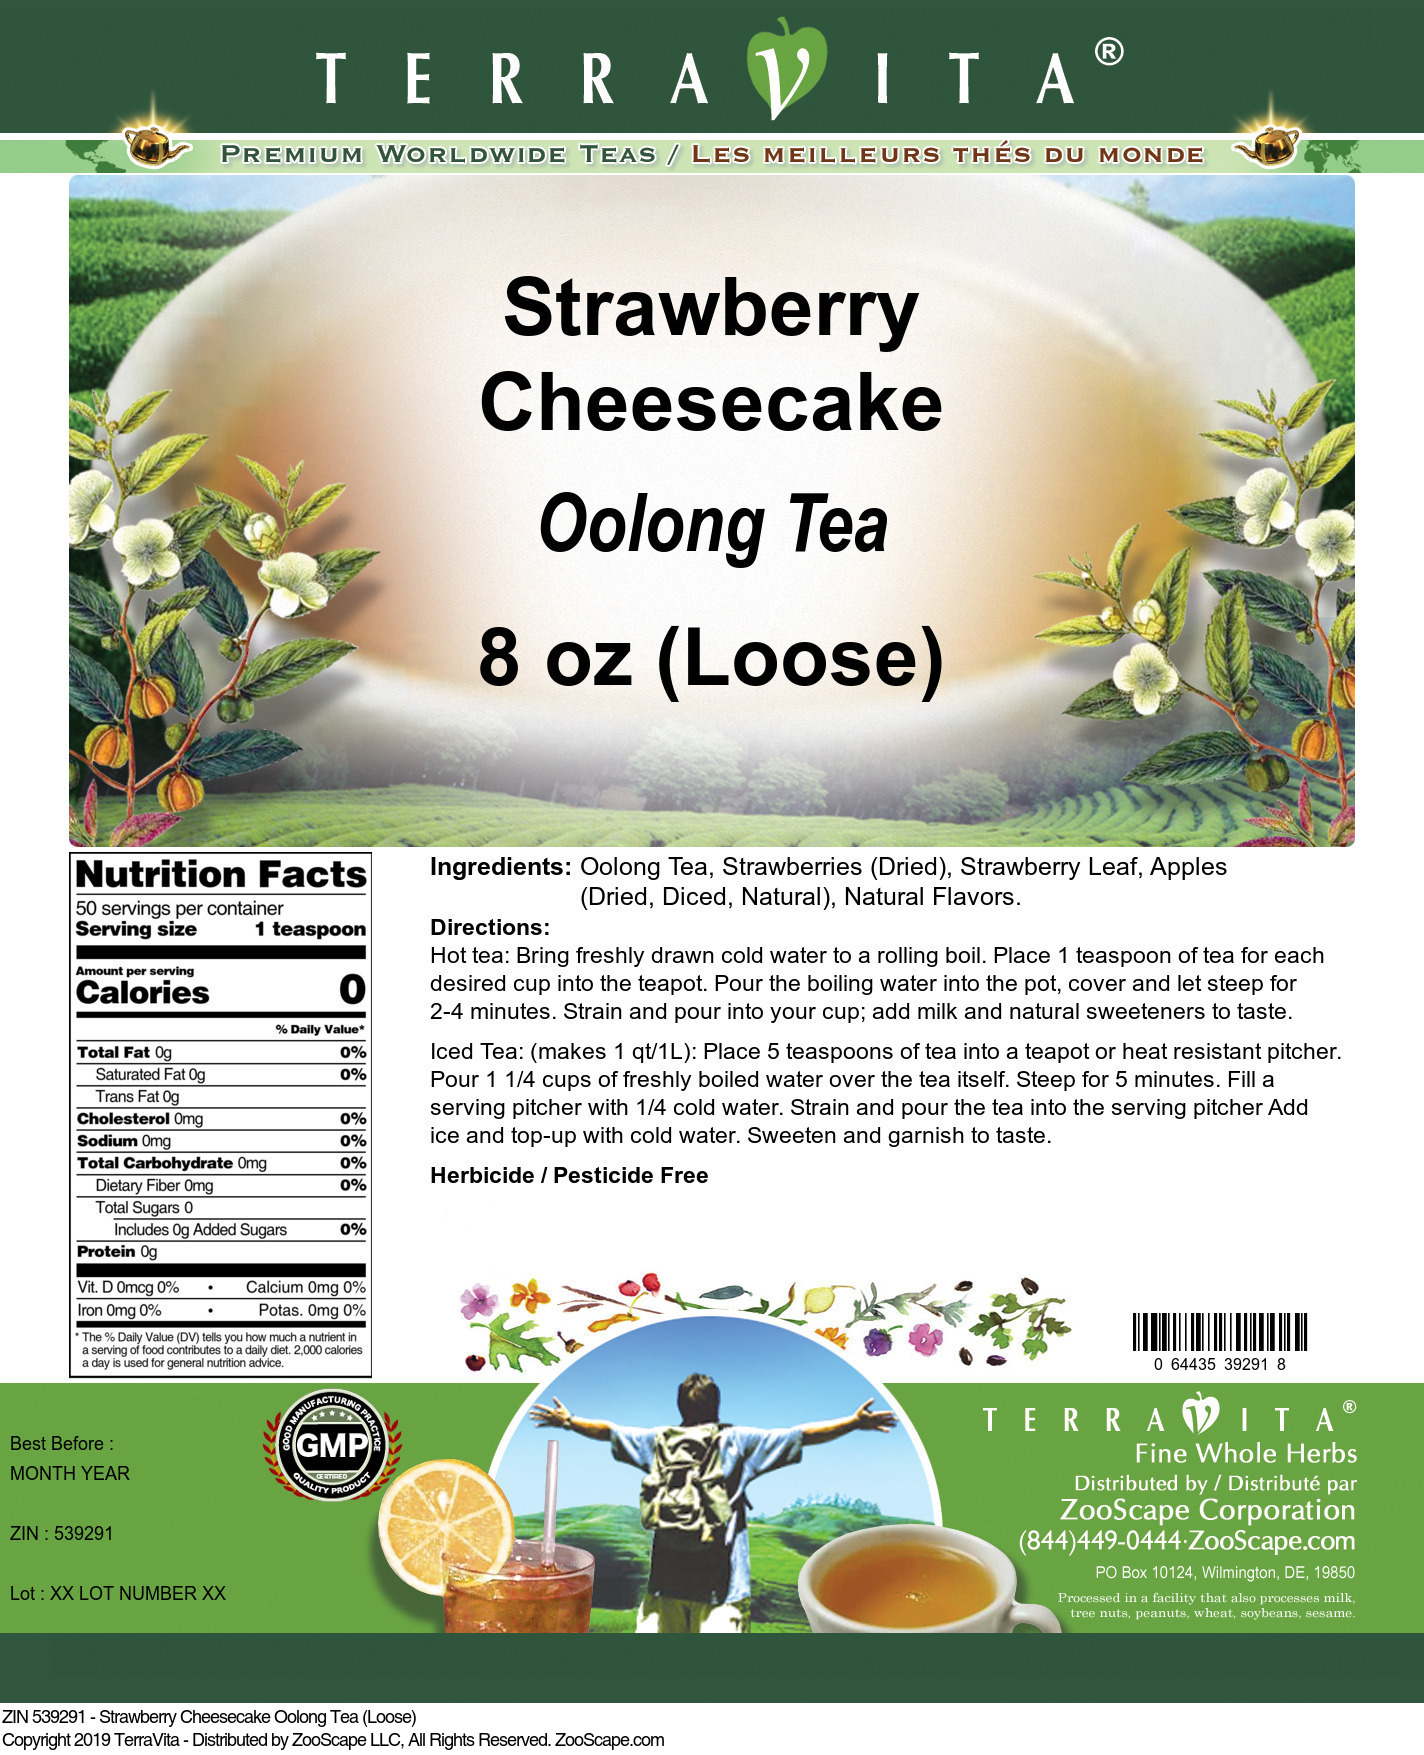 Strawberry Cheesecake Oolong Tea (Loose) - Label